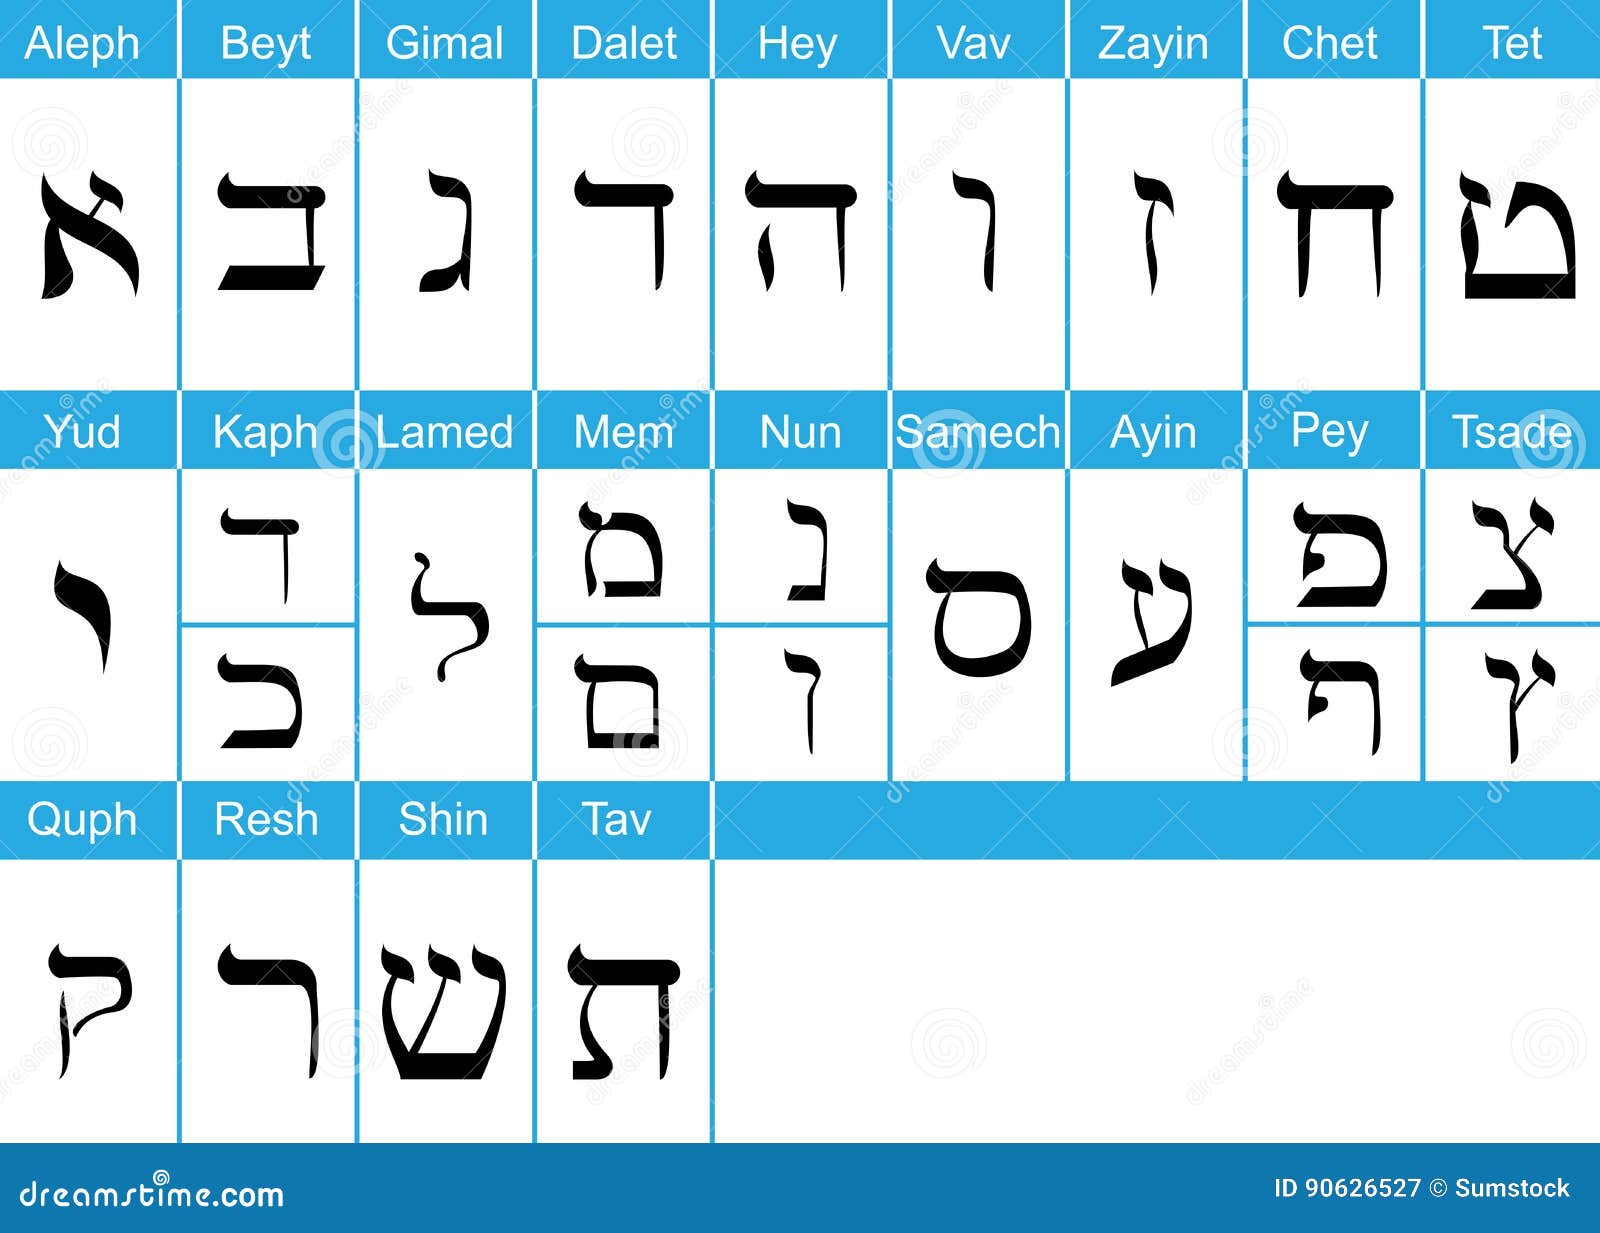 Hebrew Alphabet To English Letters Chart